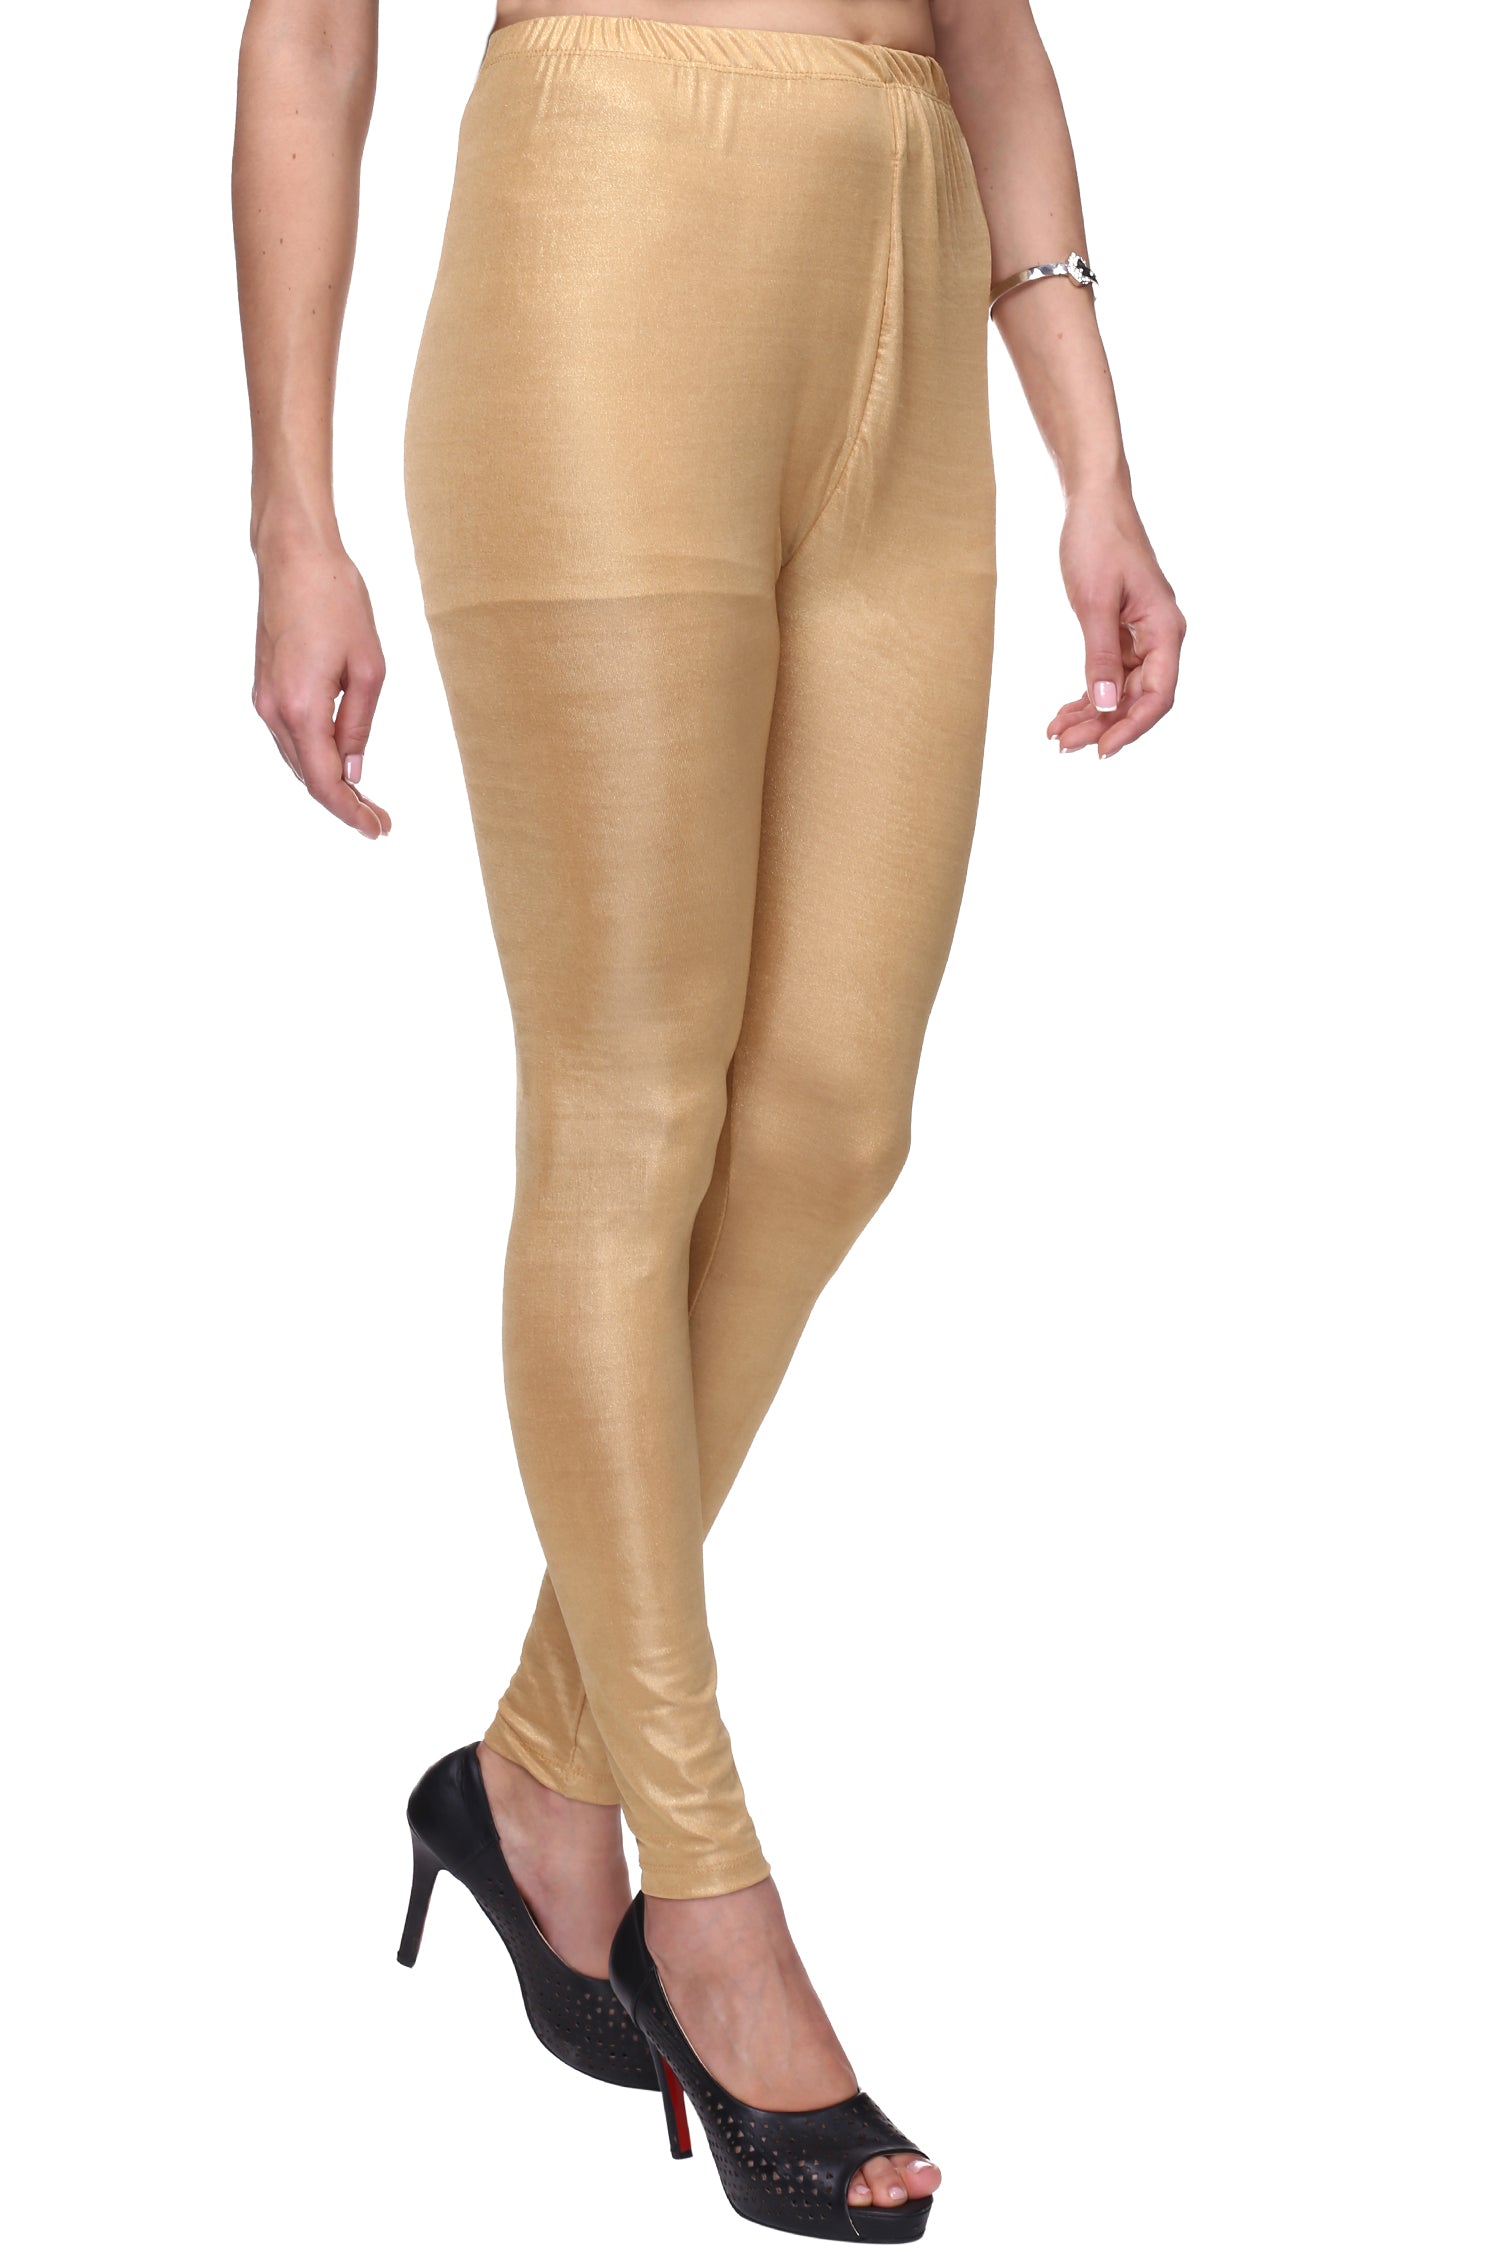 Buy PT Shining Churidar Shimmer Leggings for Available in Gold at Amazon.in